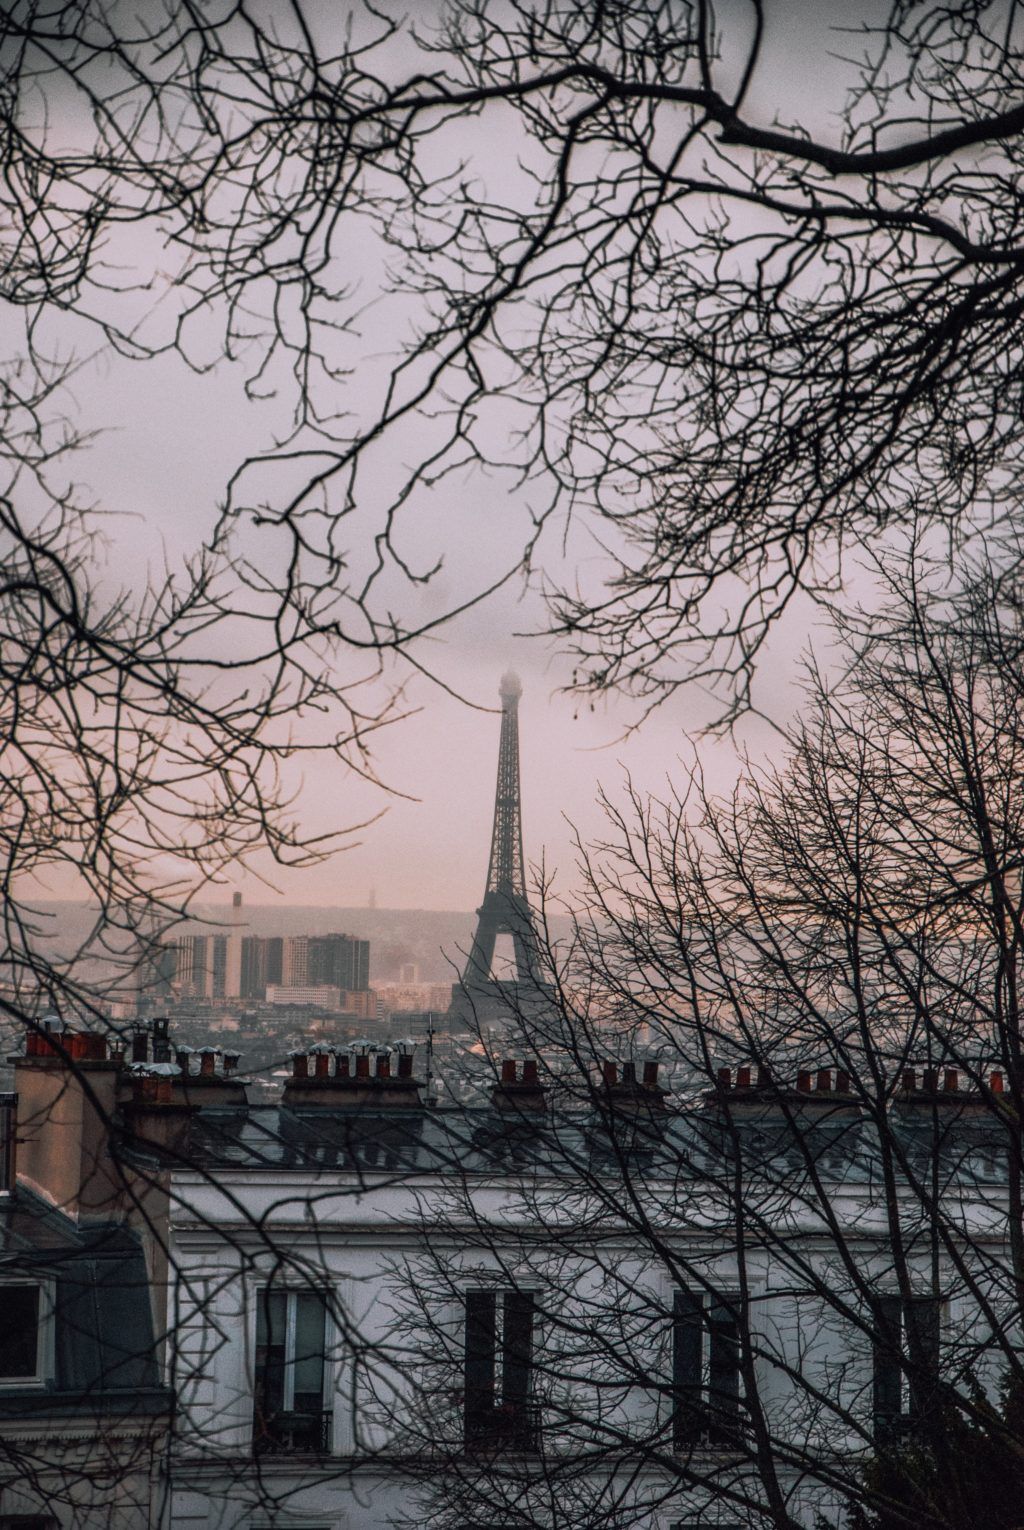 A picture of the Eiffel Tower through the branches of a tree. The sky is grey and the trees are bare.  - Eiffel Tower